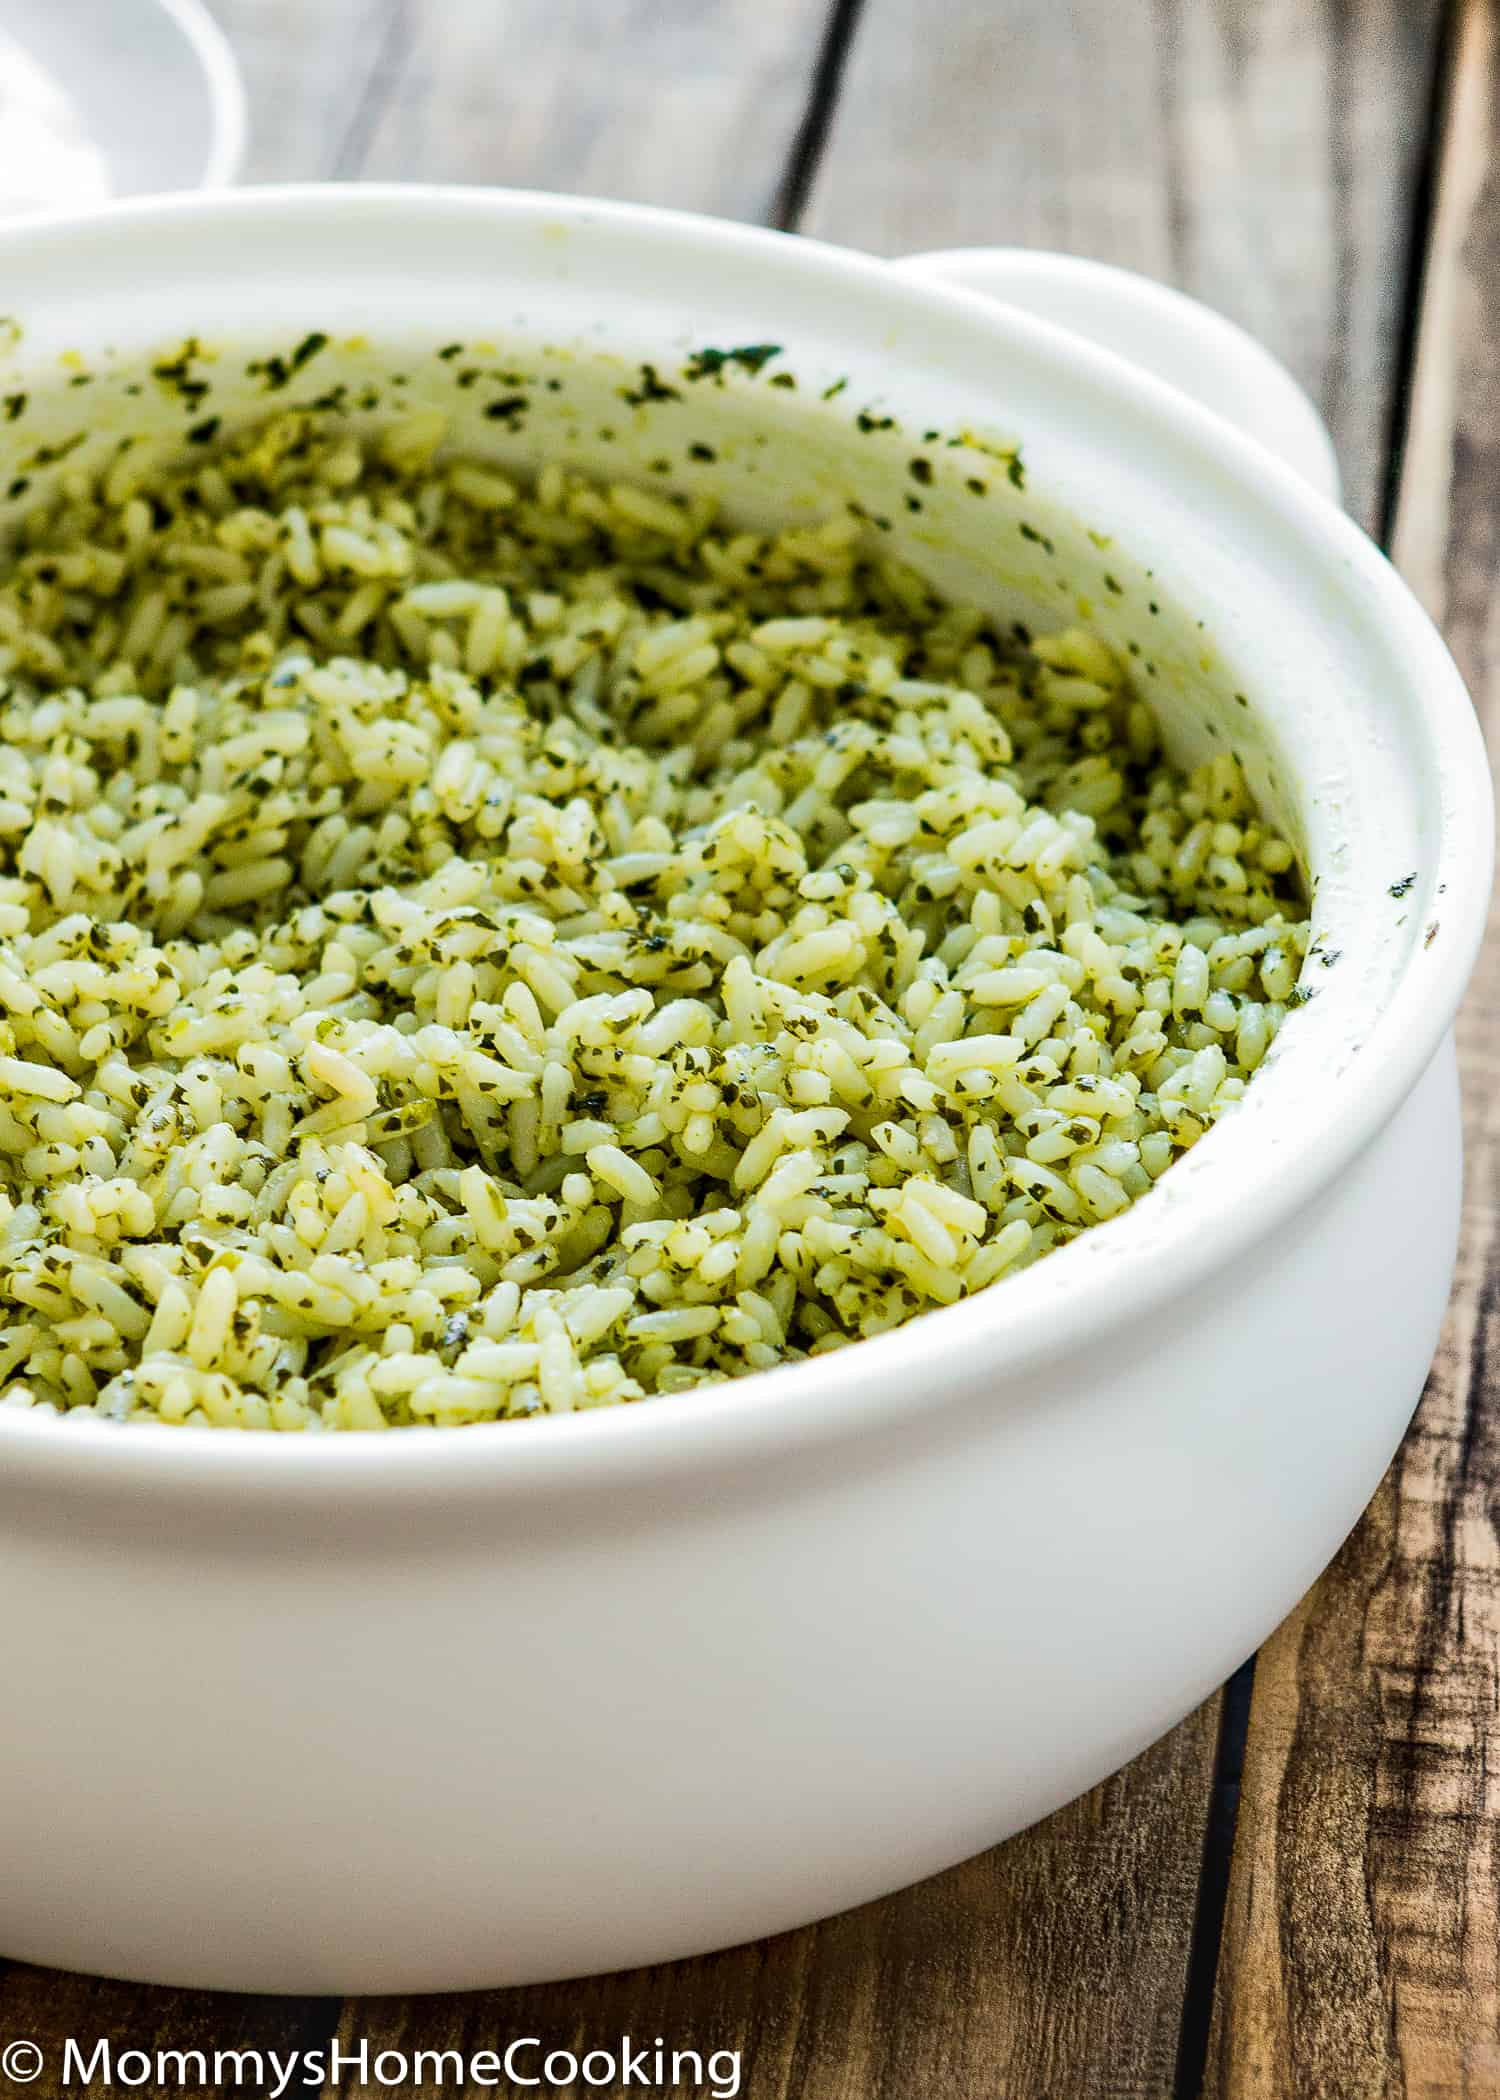 This Easy Instant Pot Mexican Green Rice is absolutely delicious! Perfect side dish for a quick weeknight meal. It requires no fuss and very little effort. WIN-WIN. Make a big batch and freeze leftovers for later. https://mommyshomecooking.com